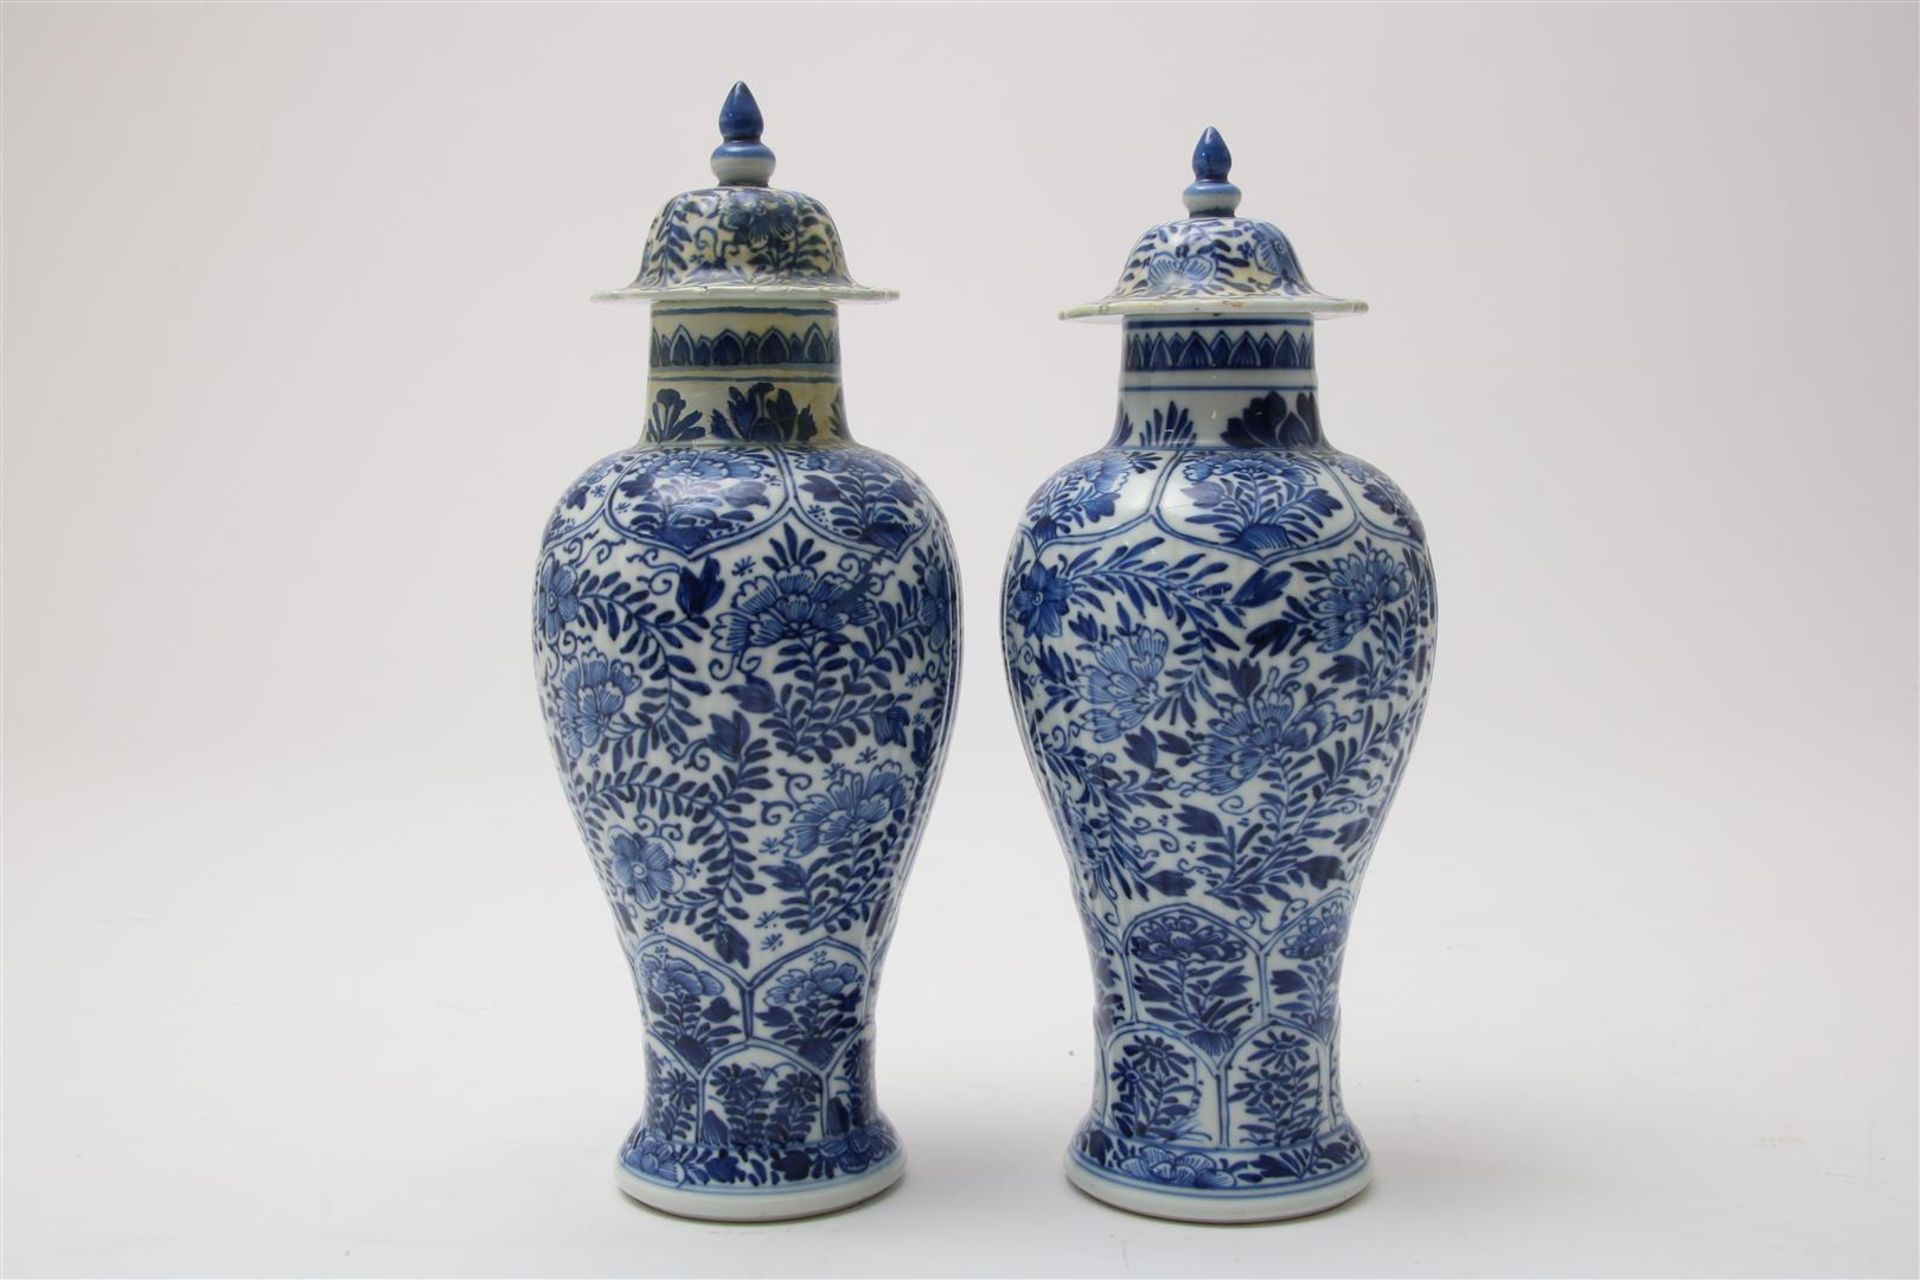 Set of porcelain baluster-shaped lidded vases with cartouches and flowering shrubs decoration, China